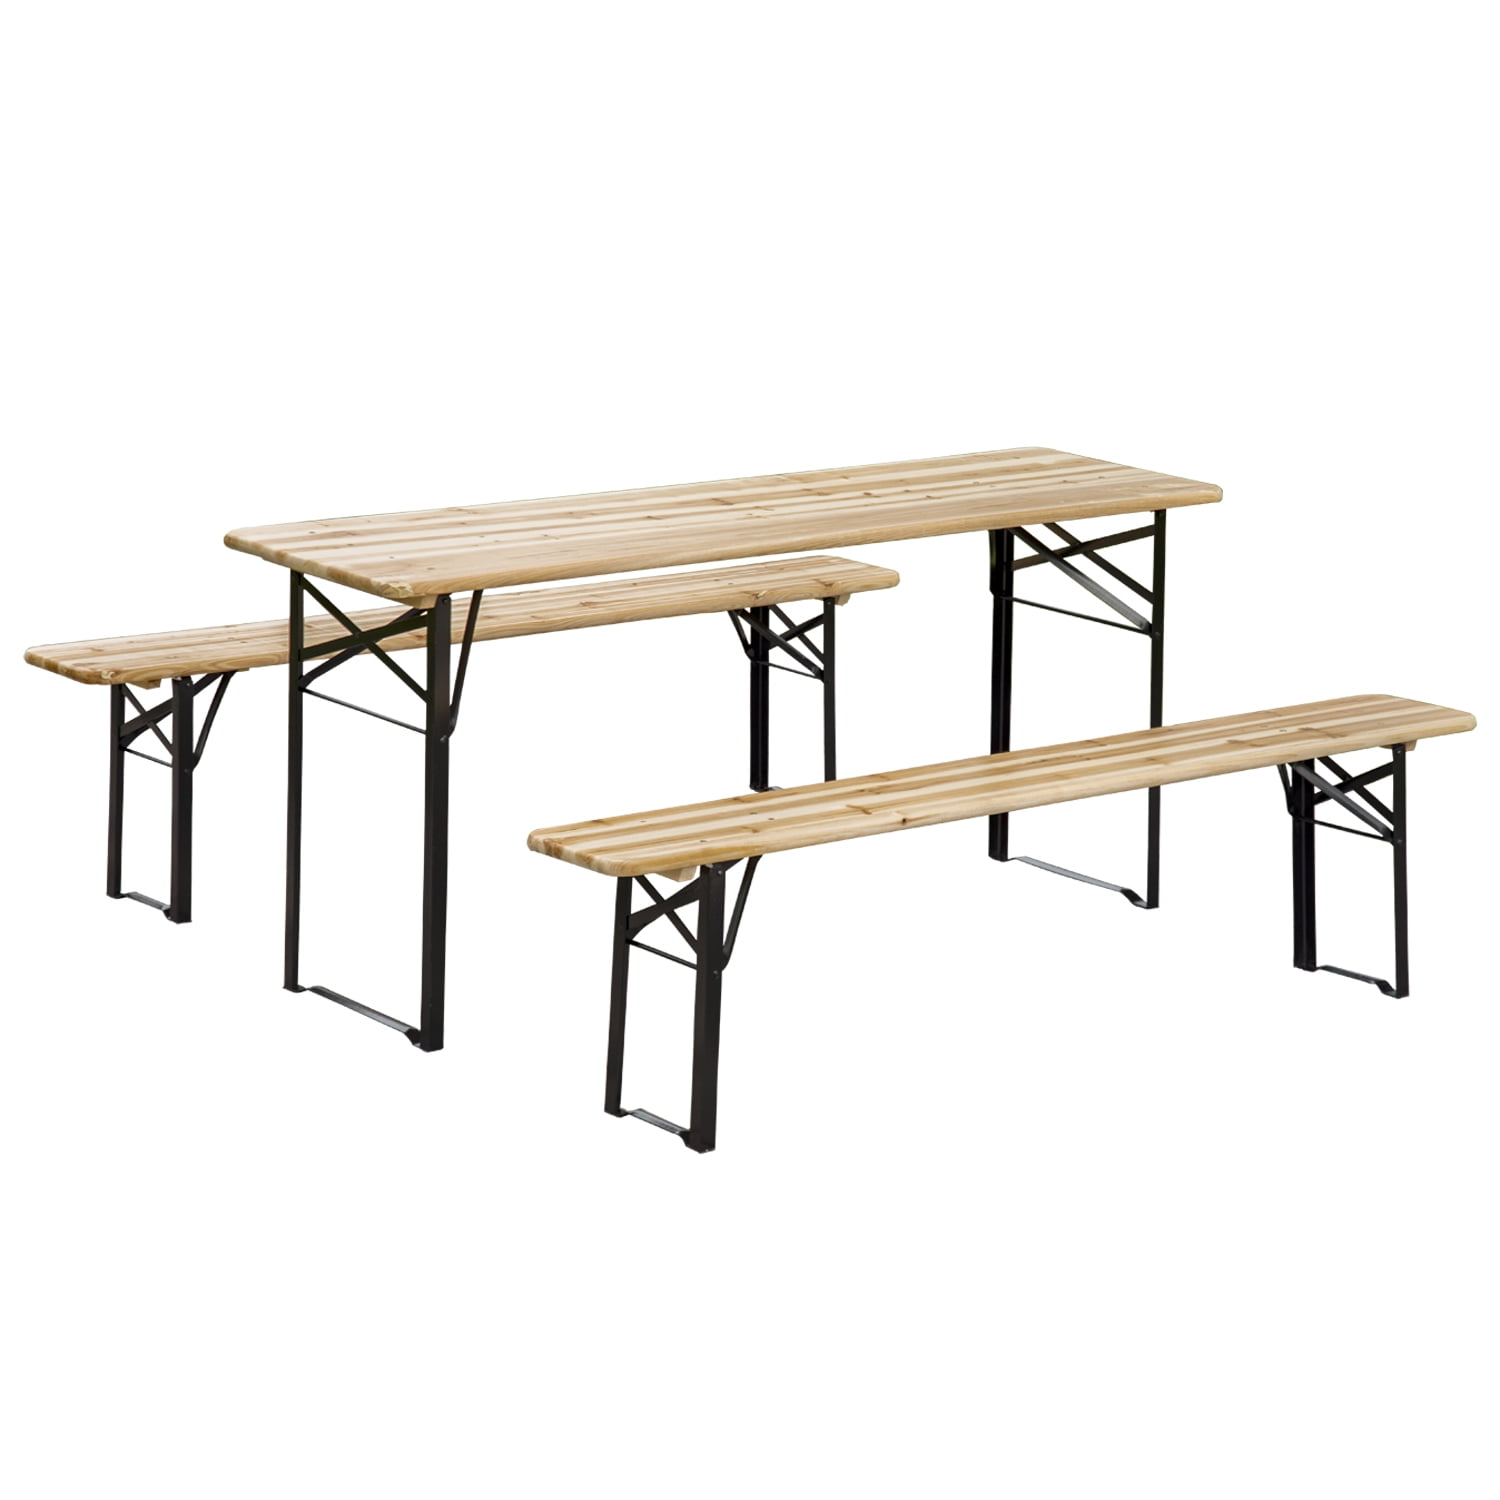 Folding Wooden Picnic Table Bench Seat Outdoor Portable Camping Aluminum 4 seats 